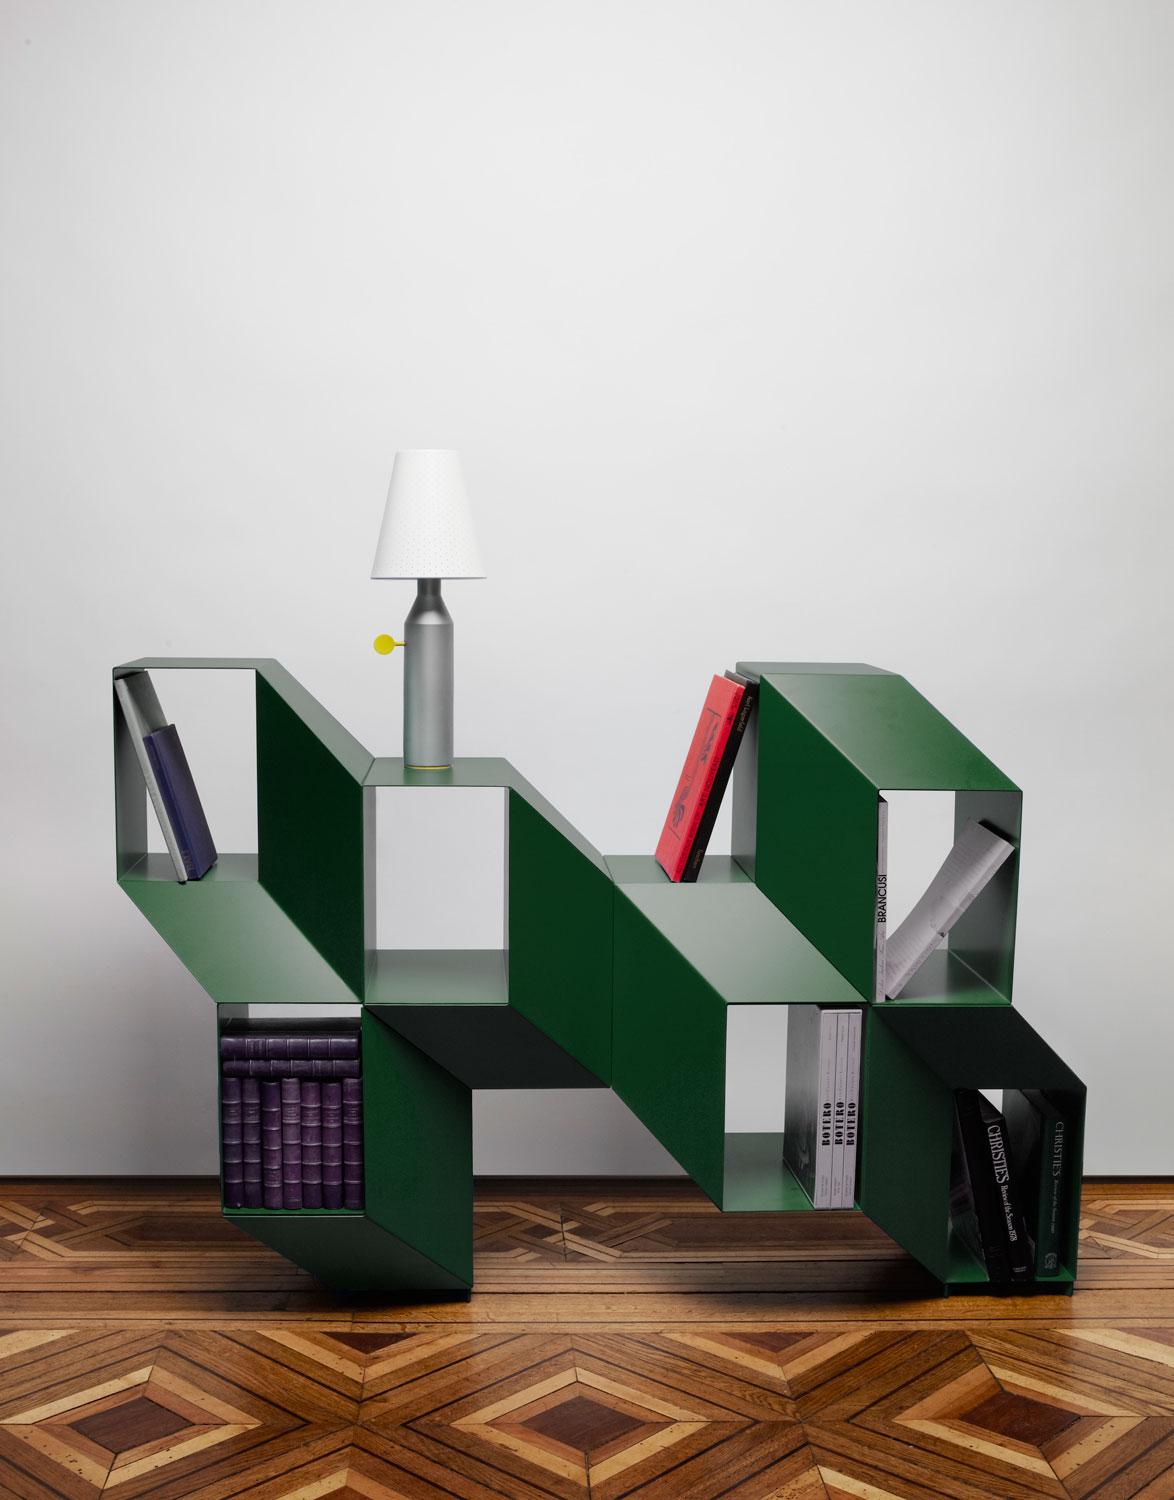 Rocky is a sculptural piece. It can be used as a console or a credenza but will also accommodate books and objects to become the most graphic display or bookshelf.

Designer Charles Kalpakian plays with our perception of space and volume with an